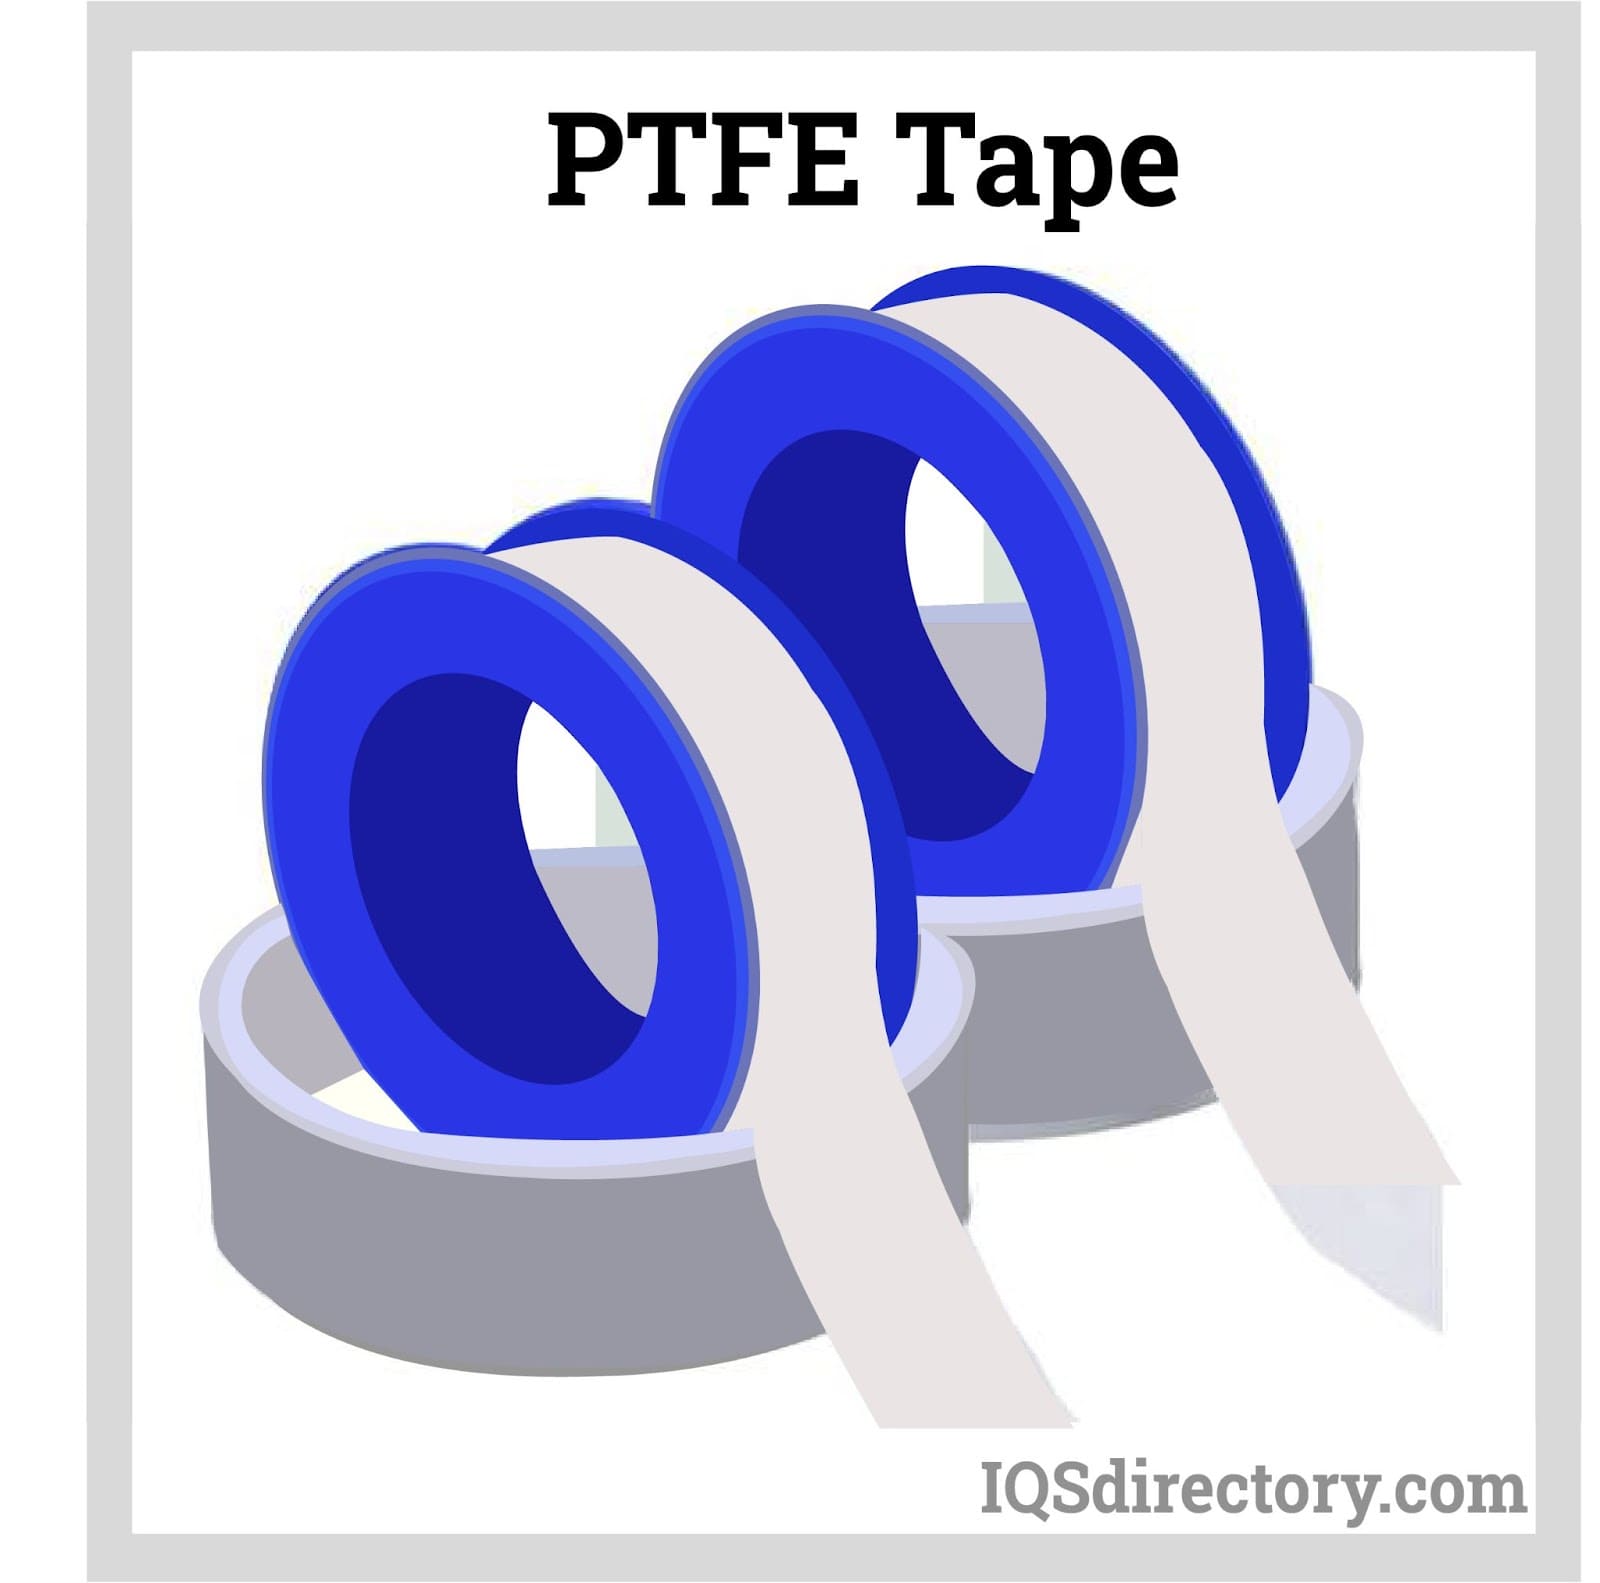 PTFE tape: Types of PTFE tape, Uses/Applications, Features and Benefits